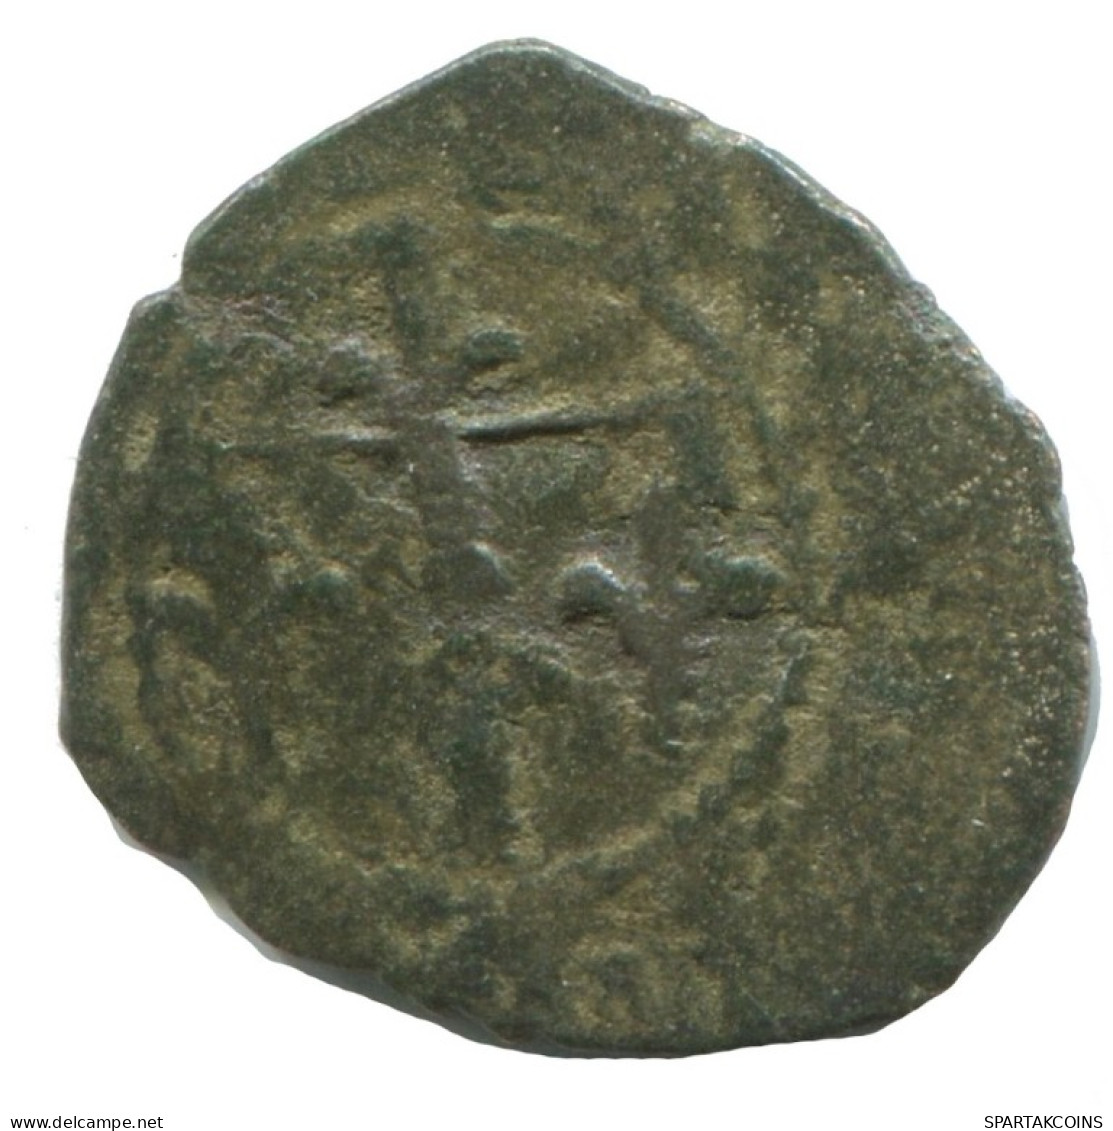 CRUSADER CROSS Authentic Original MEDIEVAL EUROPEAN Coin 0.7g/15mm #AC367.8.F.A - Other - Europe